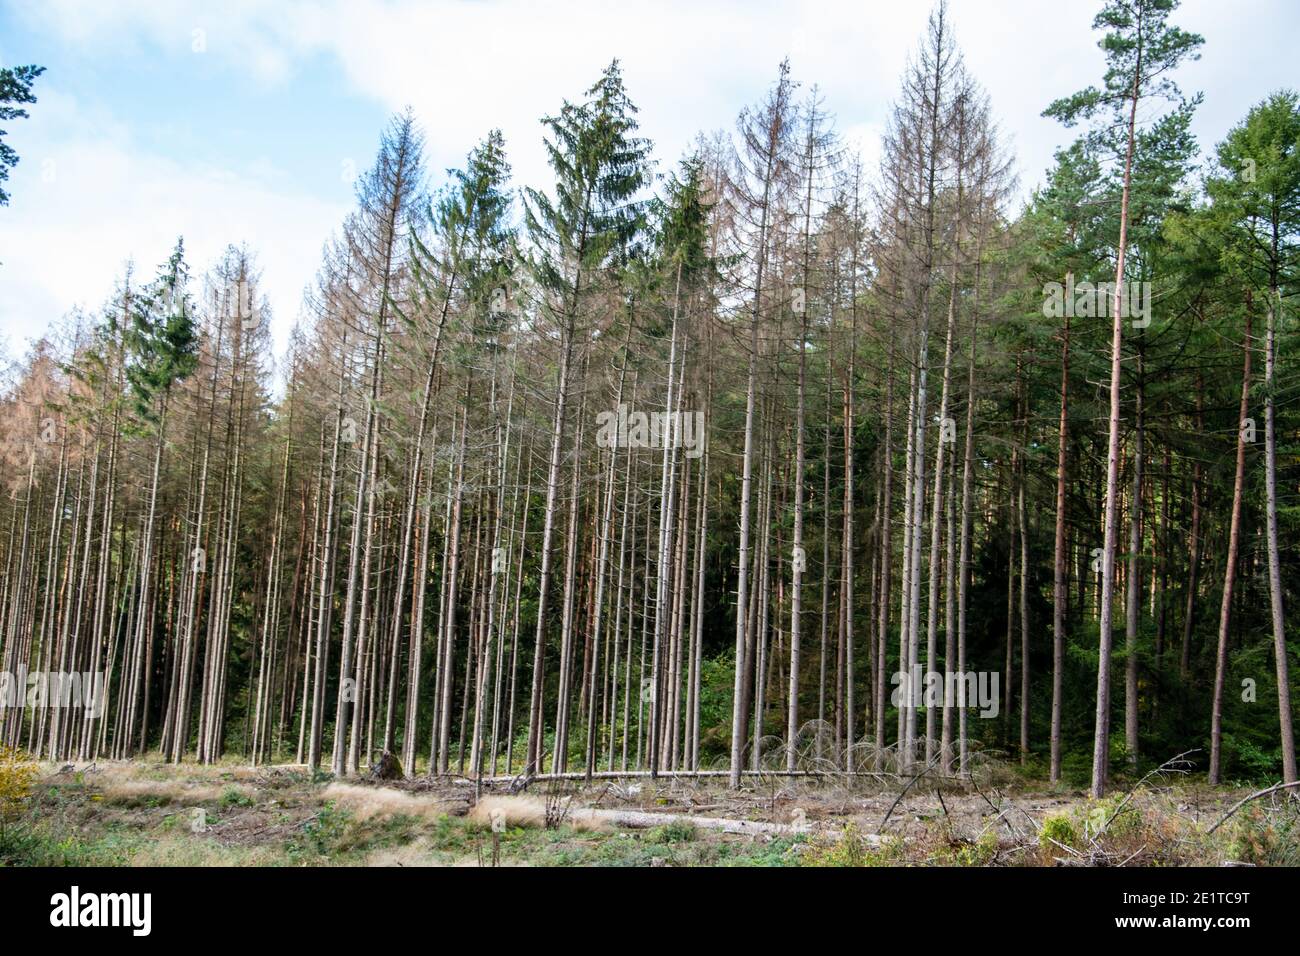 A spruce forest badly damaged by bark beetles. Stock Photo